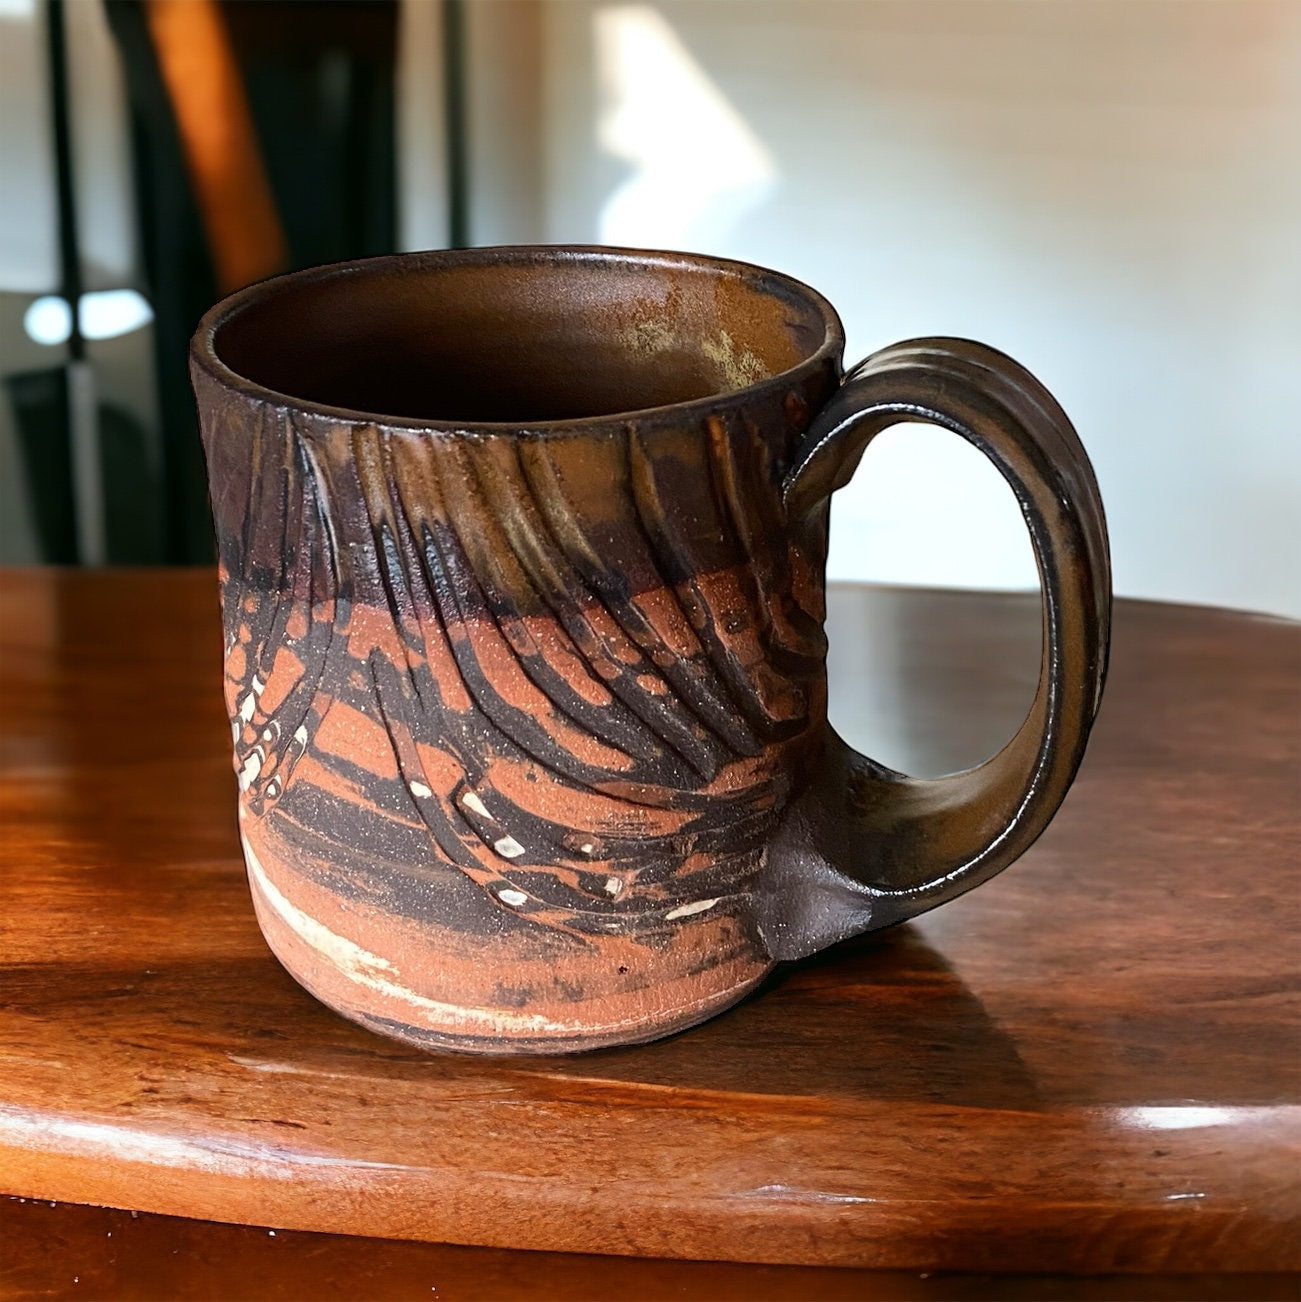 Red and Black Carved Agateware 12-Ounce Coffee or Tea Mug: Handcrafted Elegance for Your Morning Brew